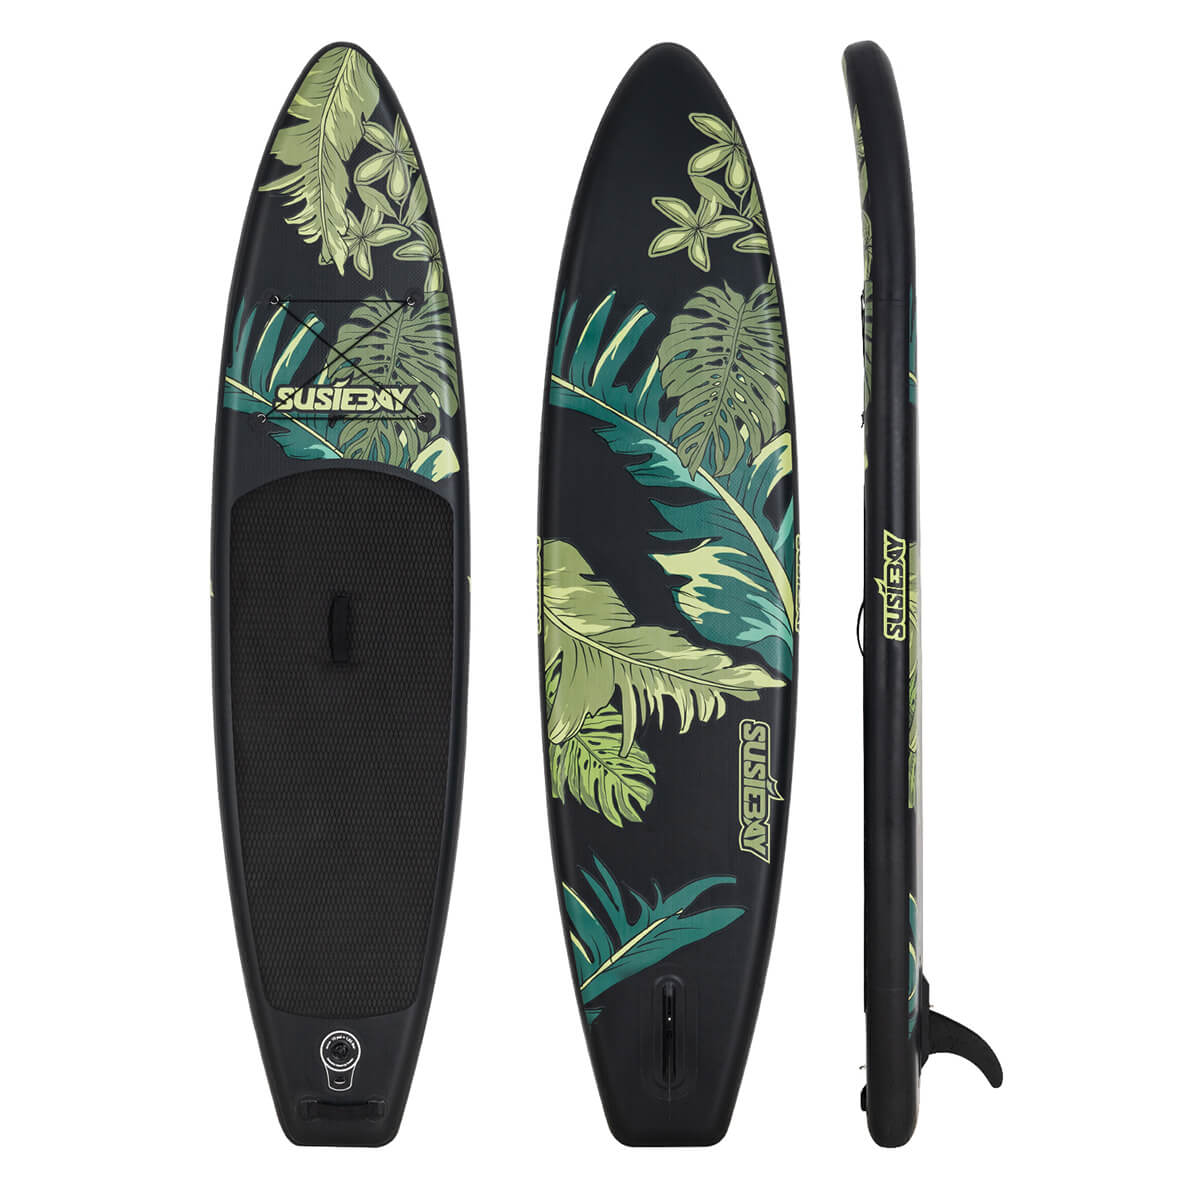 Board, Stand Board Yoga Inflatable Susiebay Floating Board, Paddle Paddle Paddle Up